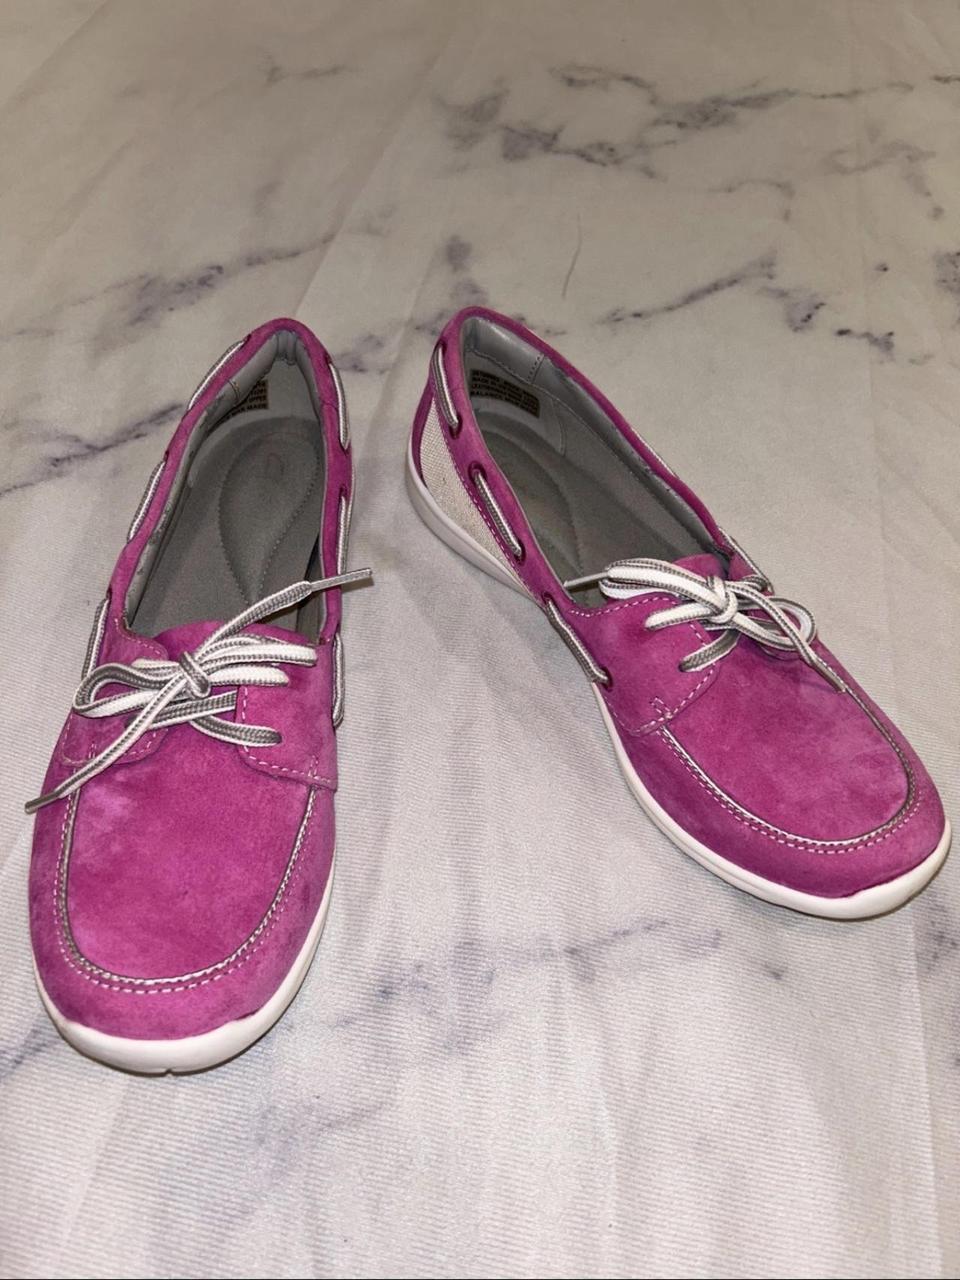 Clarks Women's Pink Boat-shoes